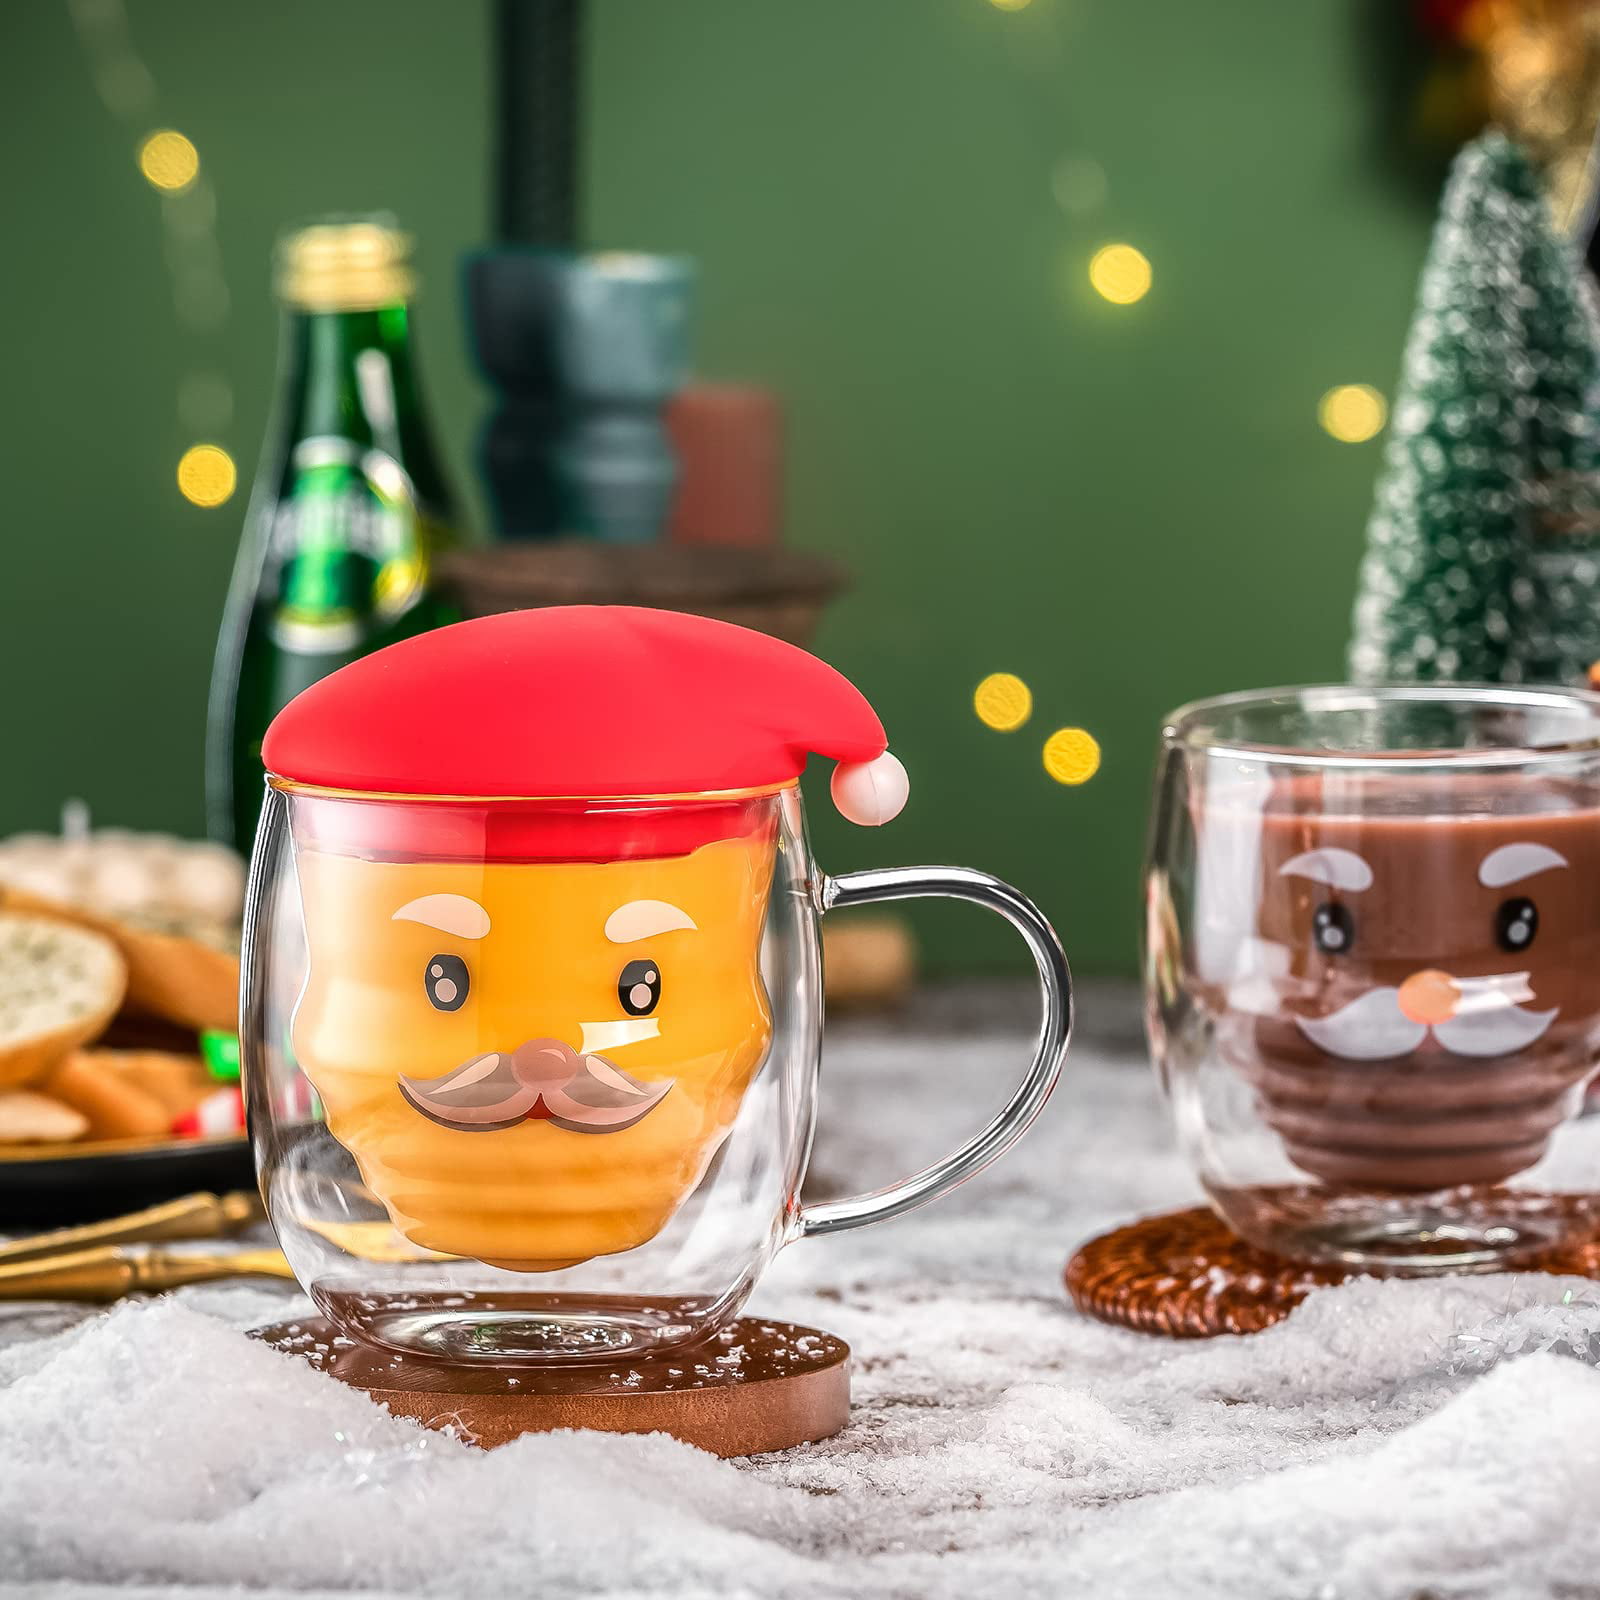 4pcs, Santa Cartoon Drinking Glasses, Double Wall Heat Insulated Espresso  Coffee Cups, Christmas Fun Gift, Suitable For Christmas Holiday Family Lover